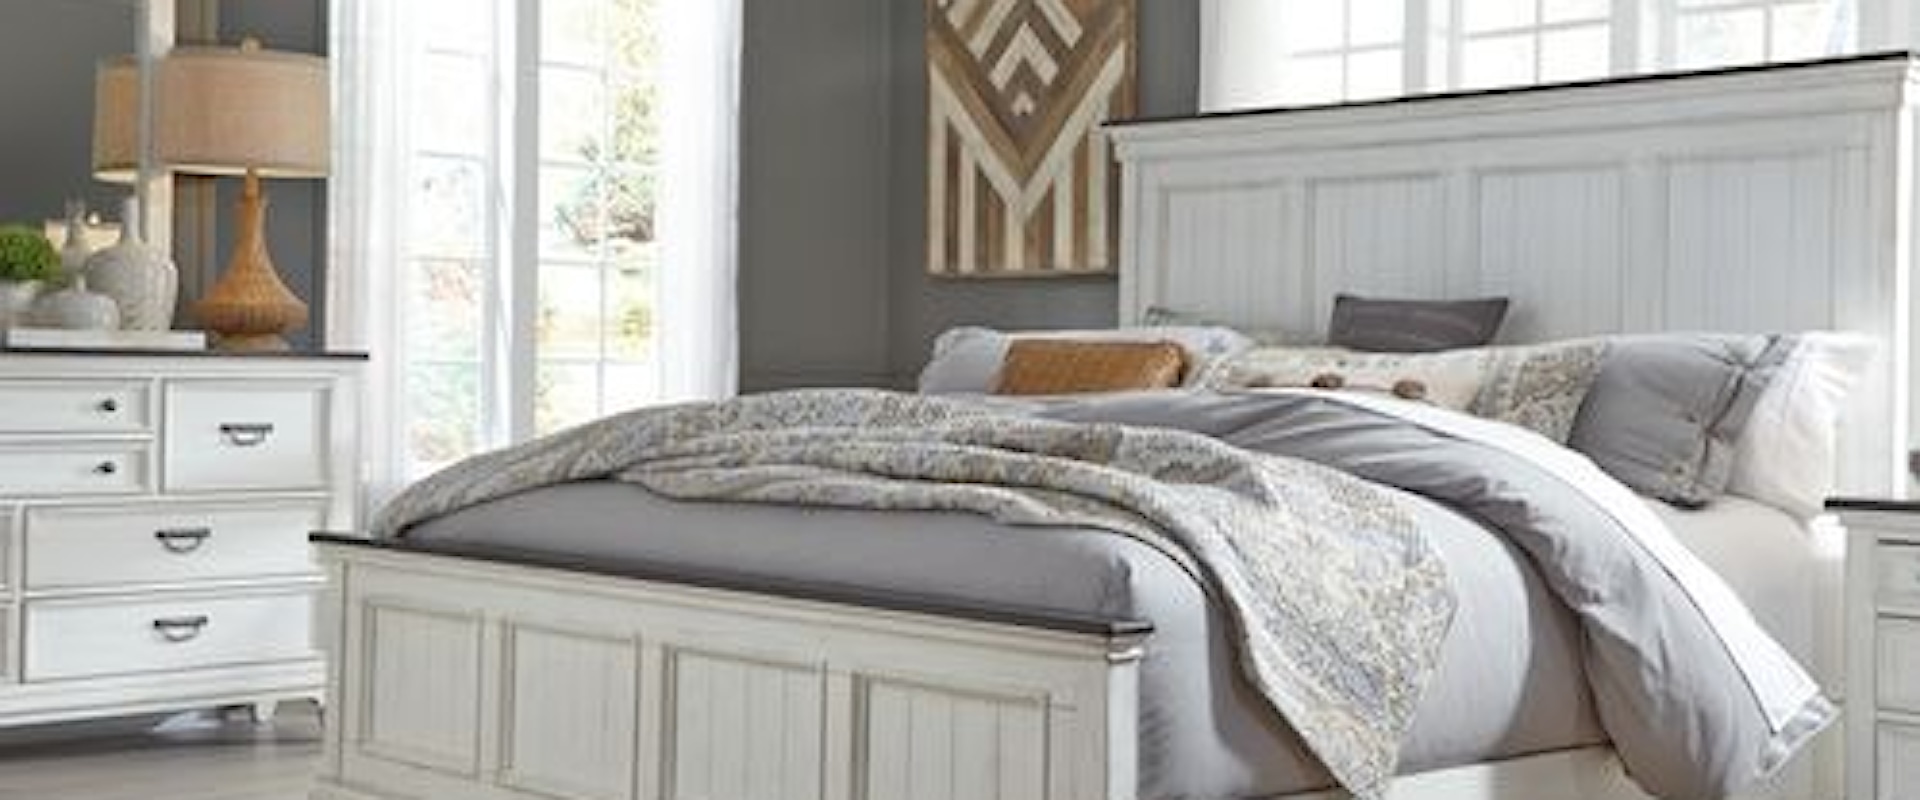 Cottage Style California King Bedroom Group